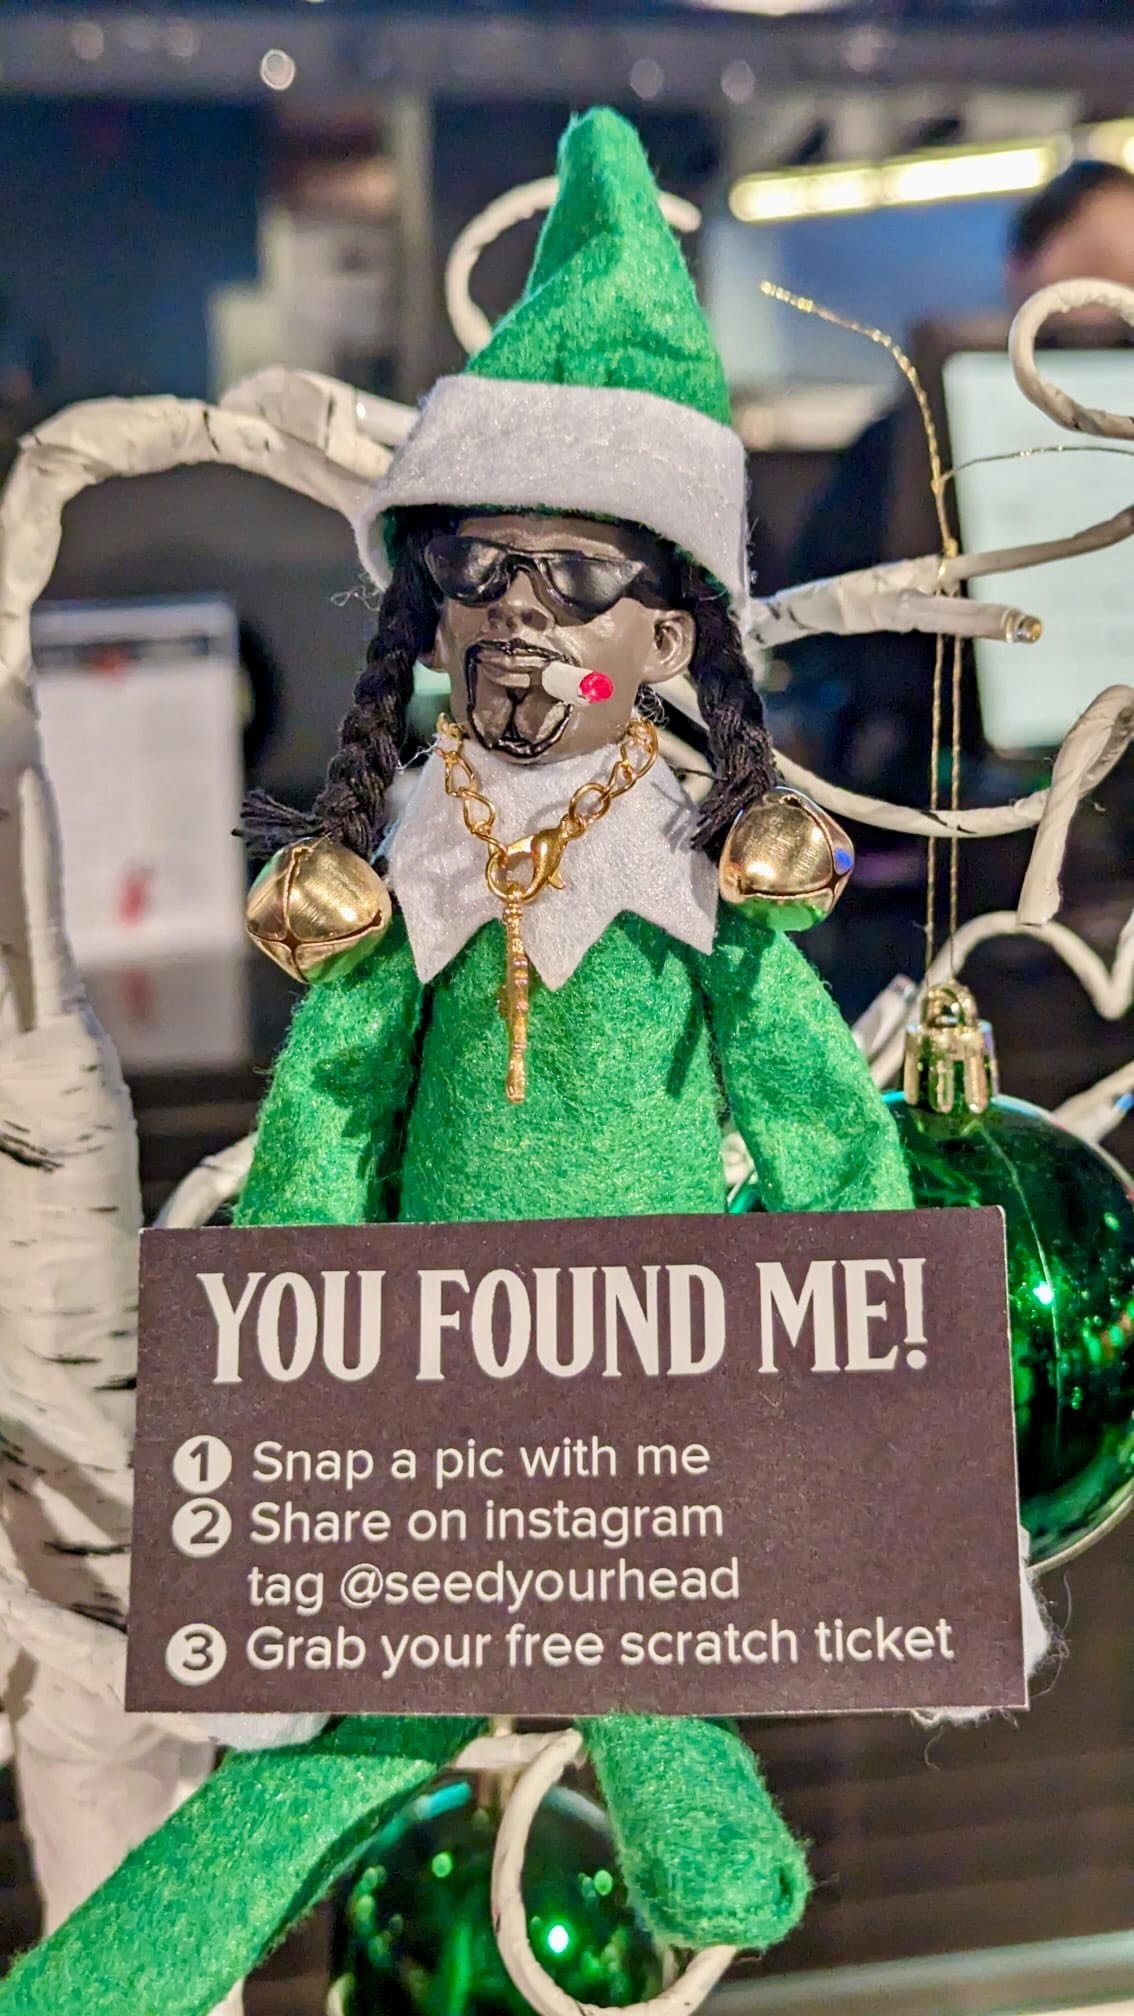 Snoopin for snoop!Join the hunt for on a Stoop at Seed + CoreSpot me in different museum spots
1. snap a pic
2. share it on Insta
3.Tag @seedyourhead, use 4. Grab your FREE scratch ticket for a chance to win cool prizes!Let the Snoop search begin!